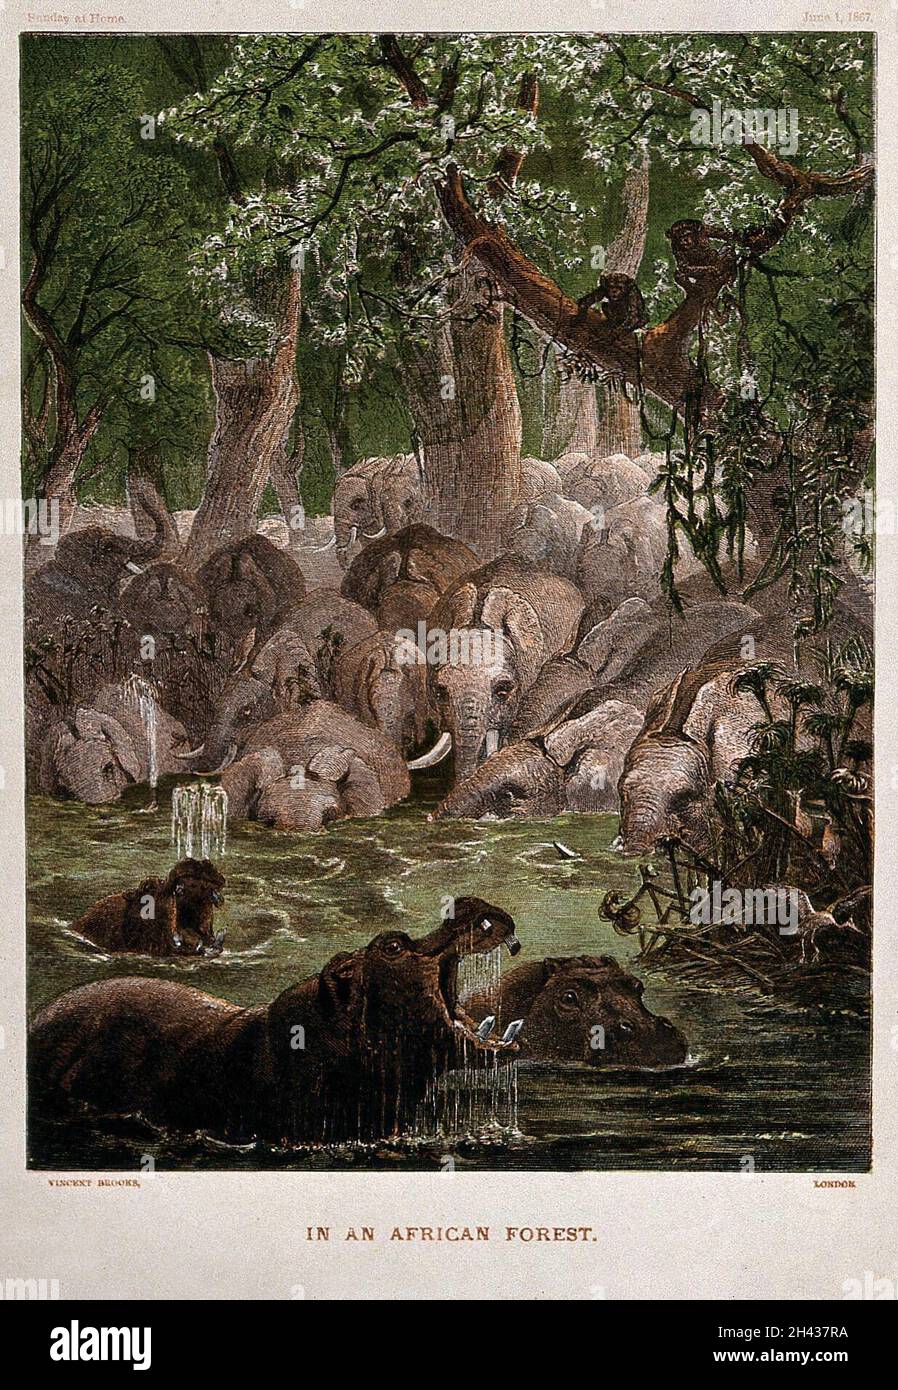 Hippopotamuses with elephants in African jungle, representing the Behemoth of the Old Testament. Colour wood engraving attributed to Edmund Evans, 1867. Stock Photo